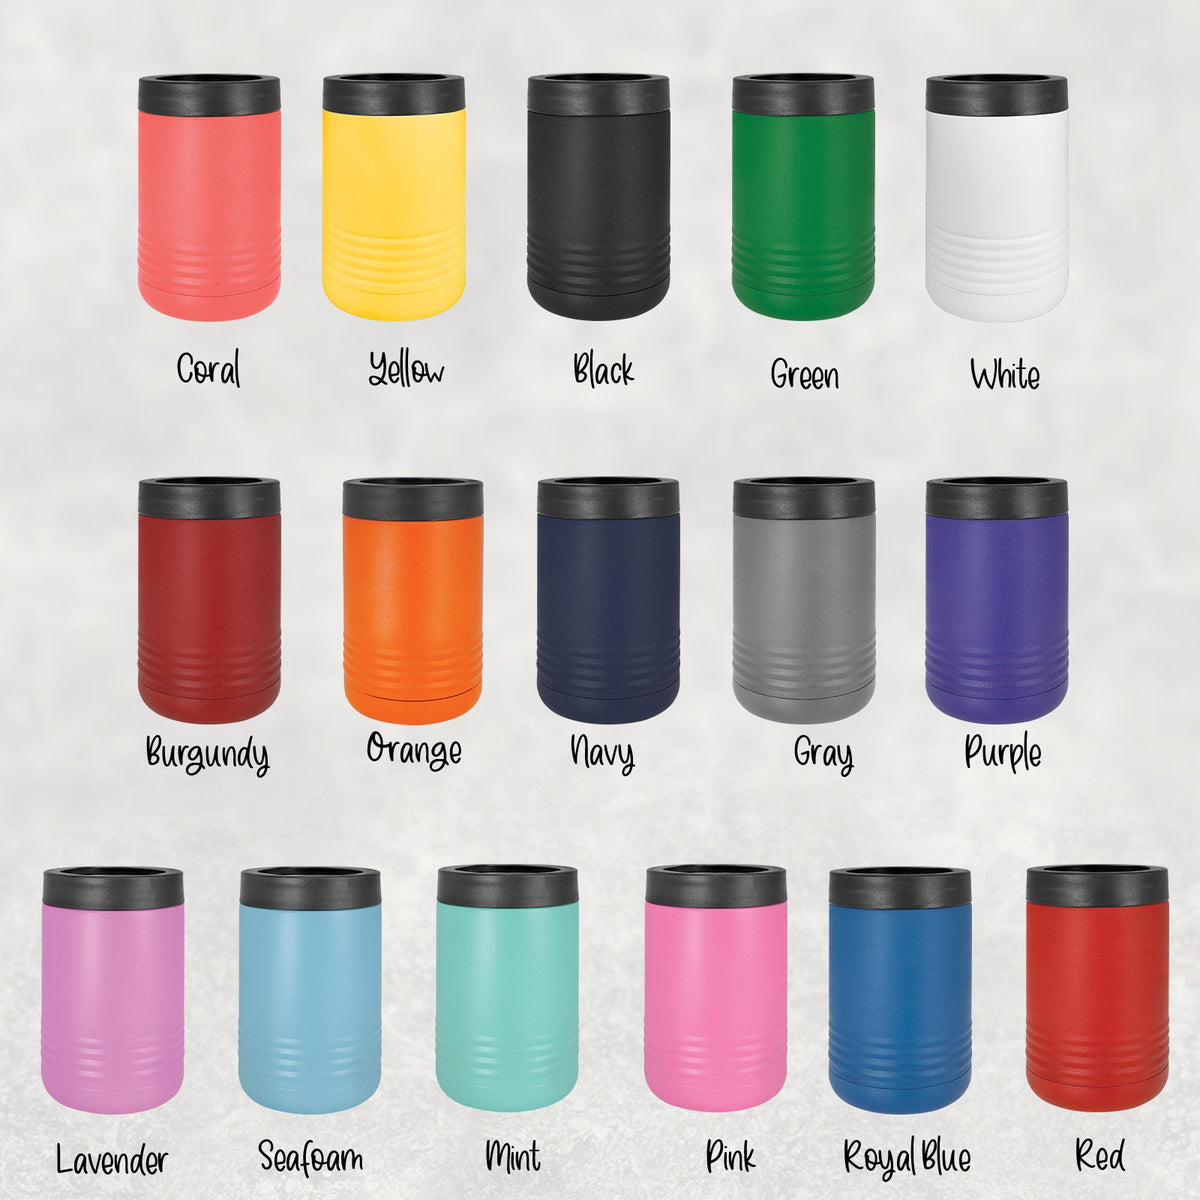 Apparently We Are Trouble When Together Vacuum Insulated Stainless Steel Beverage Holder, 16 Colors! Standard or Slim!